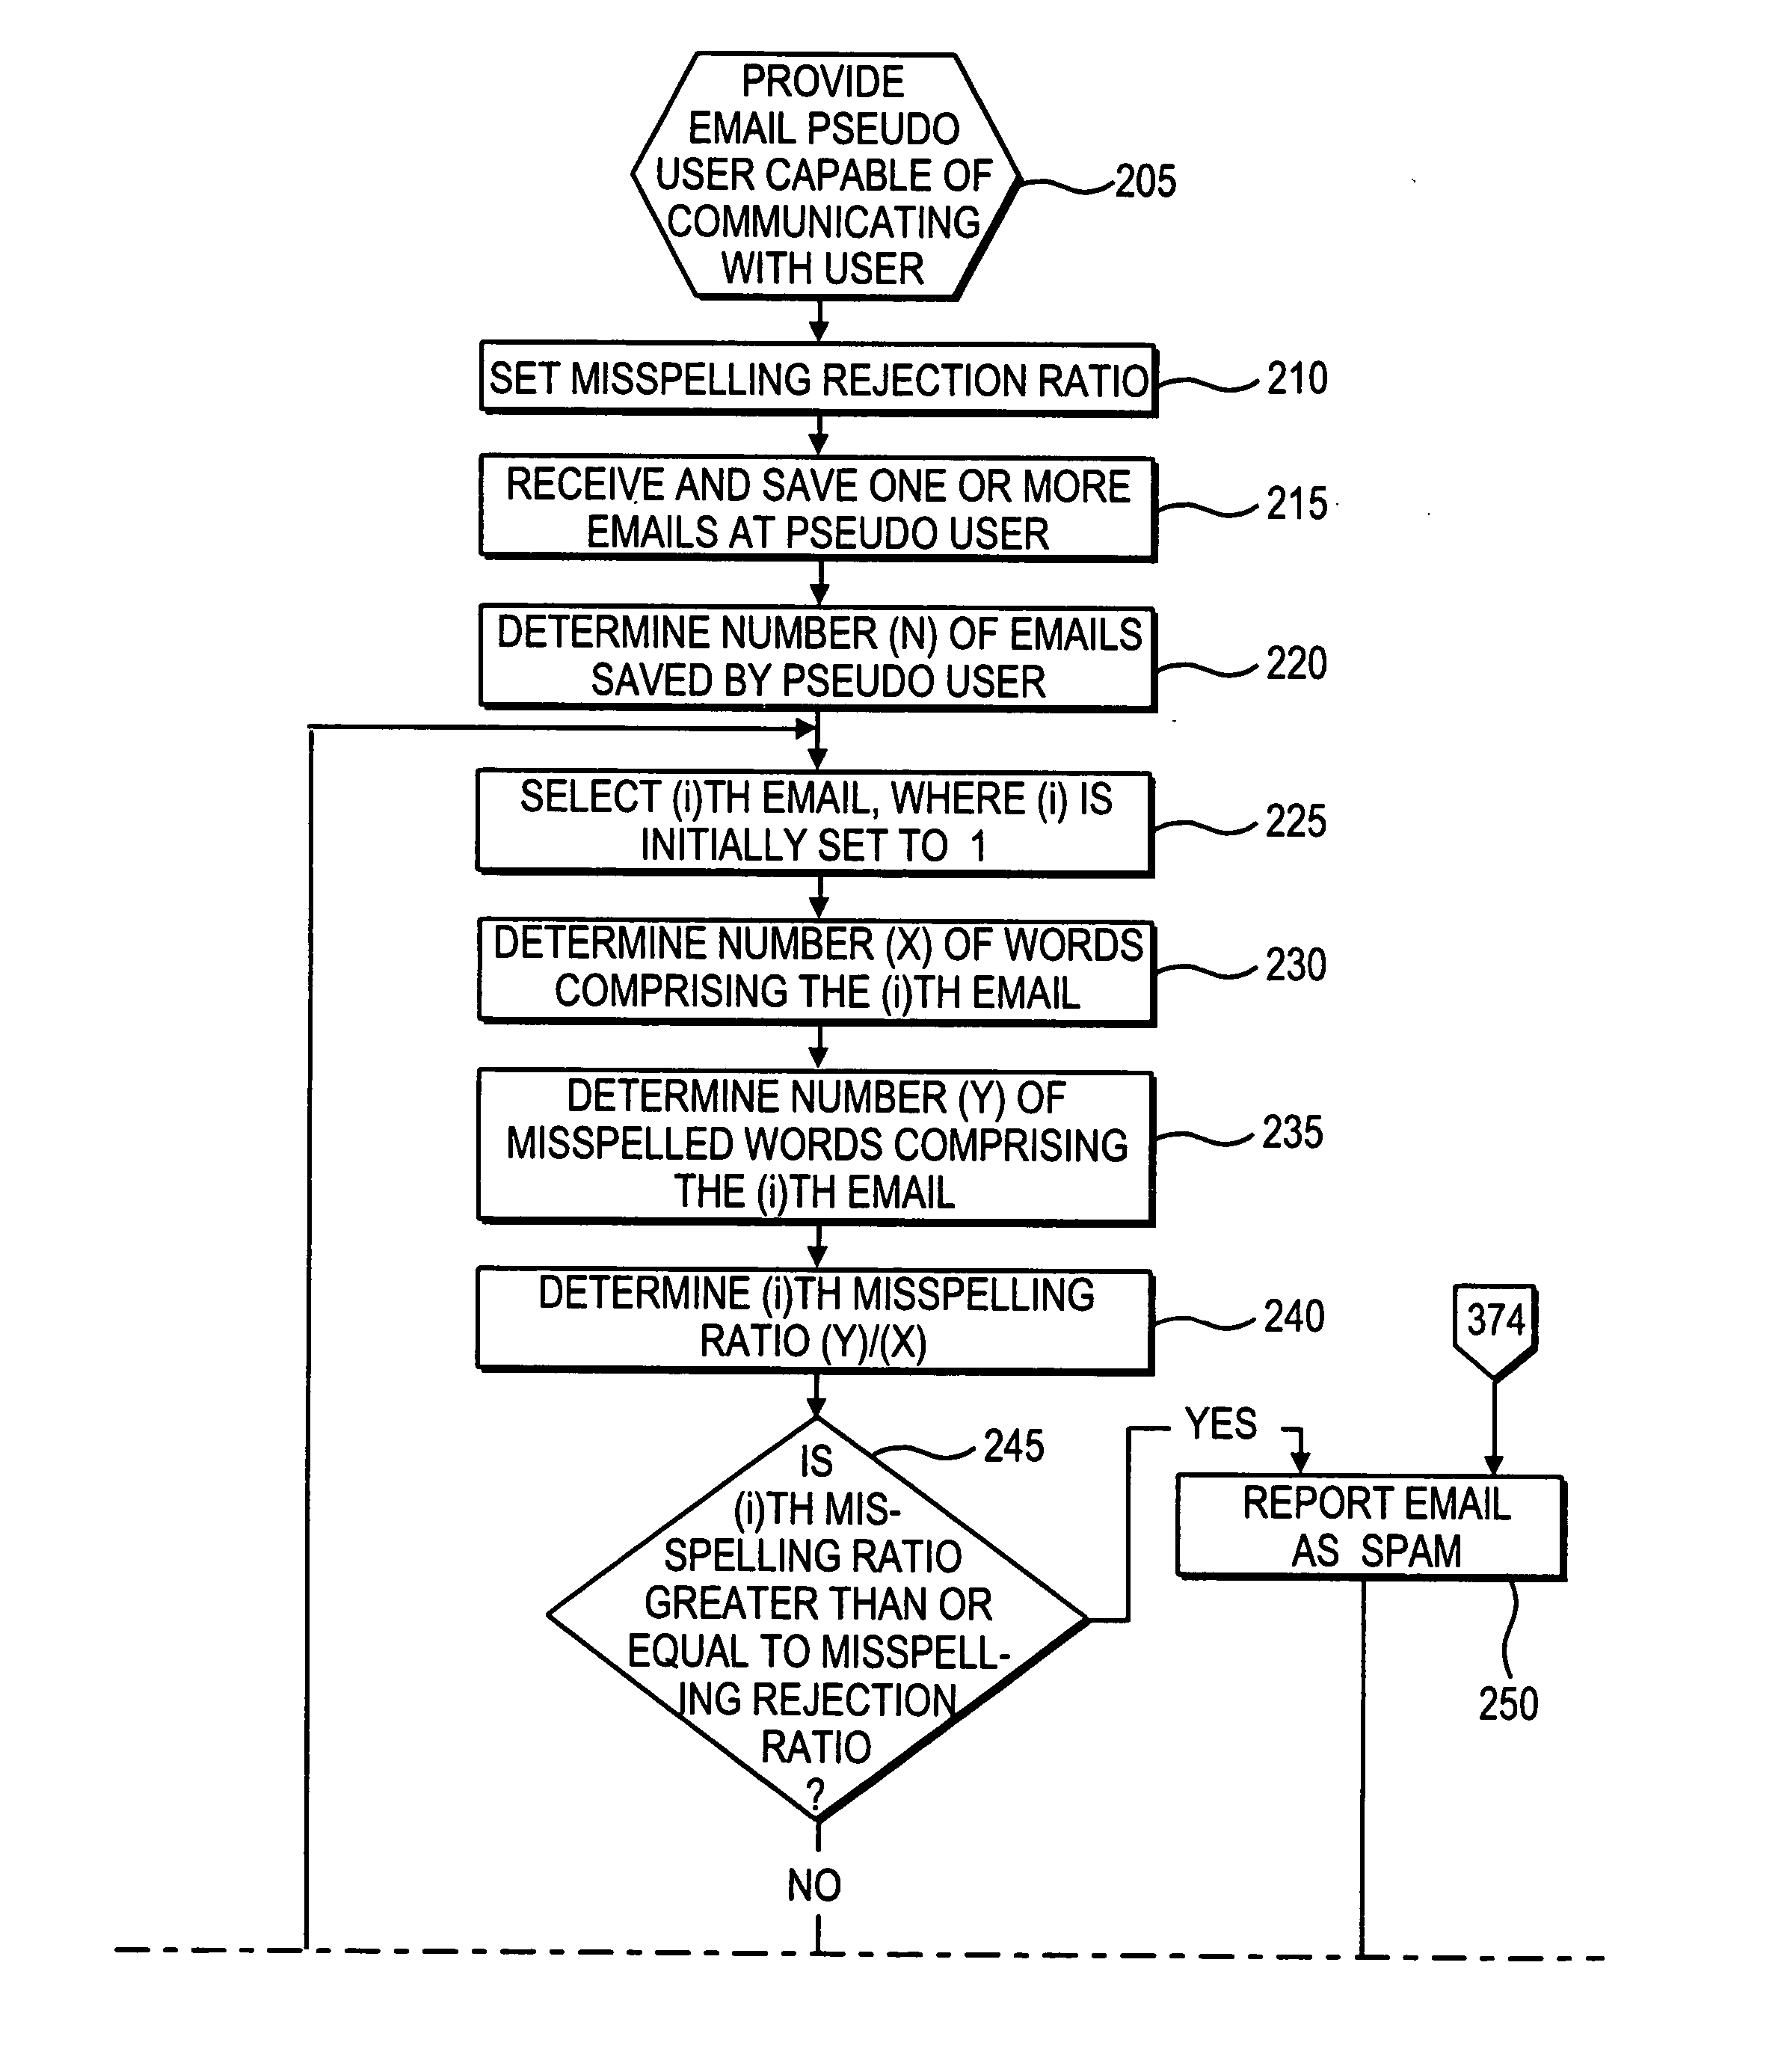 Apparatus and method to identify SPAM emails